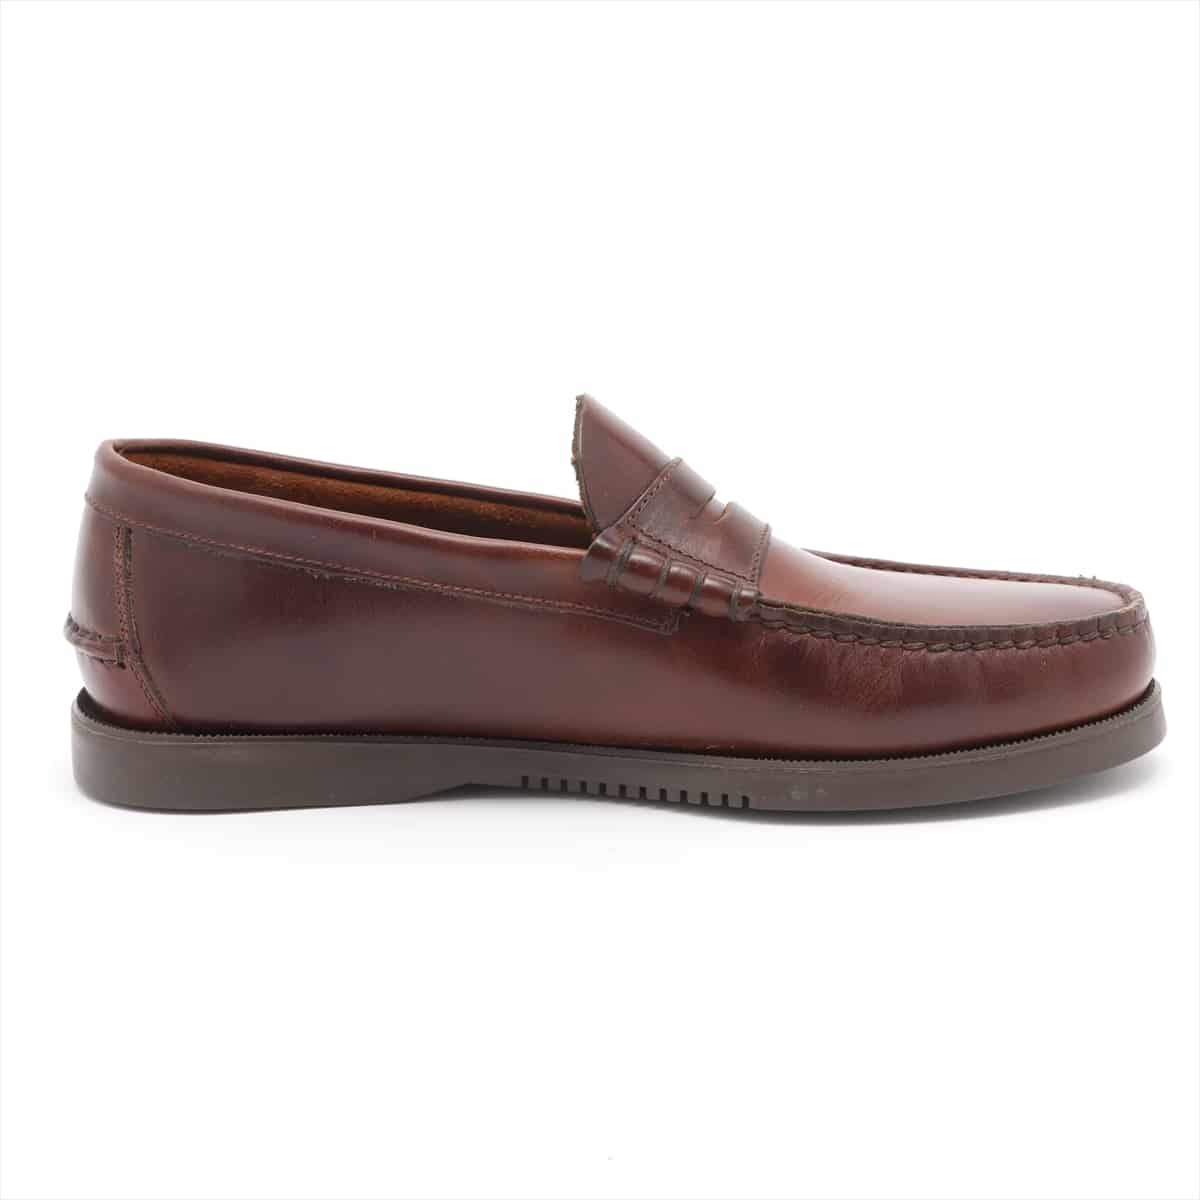 Paraboot Leather Loafer 6 Men's Brown 093603 Coro